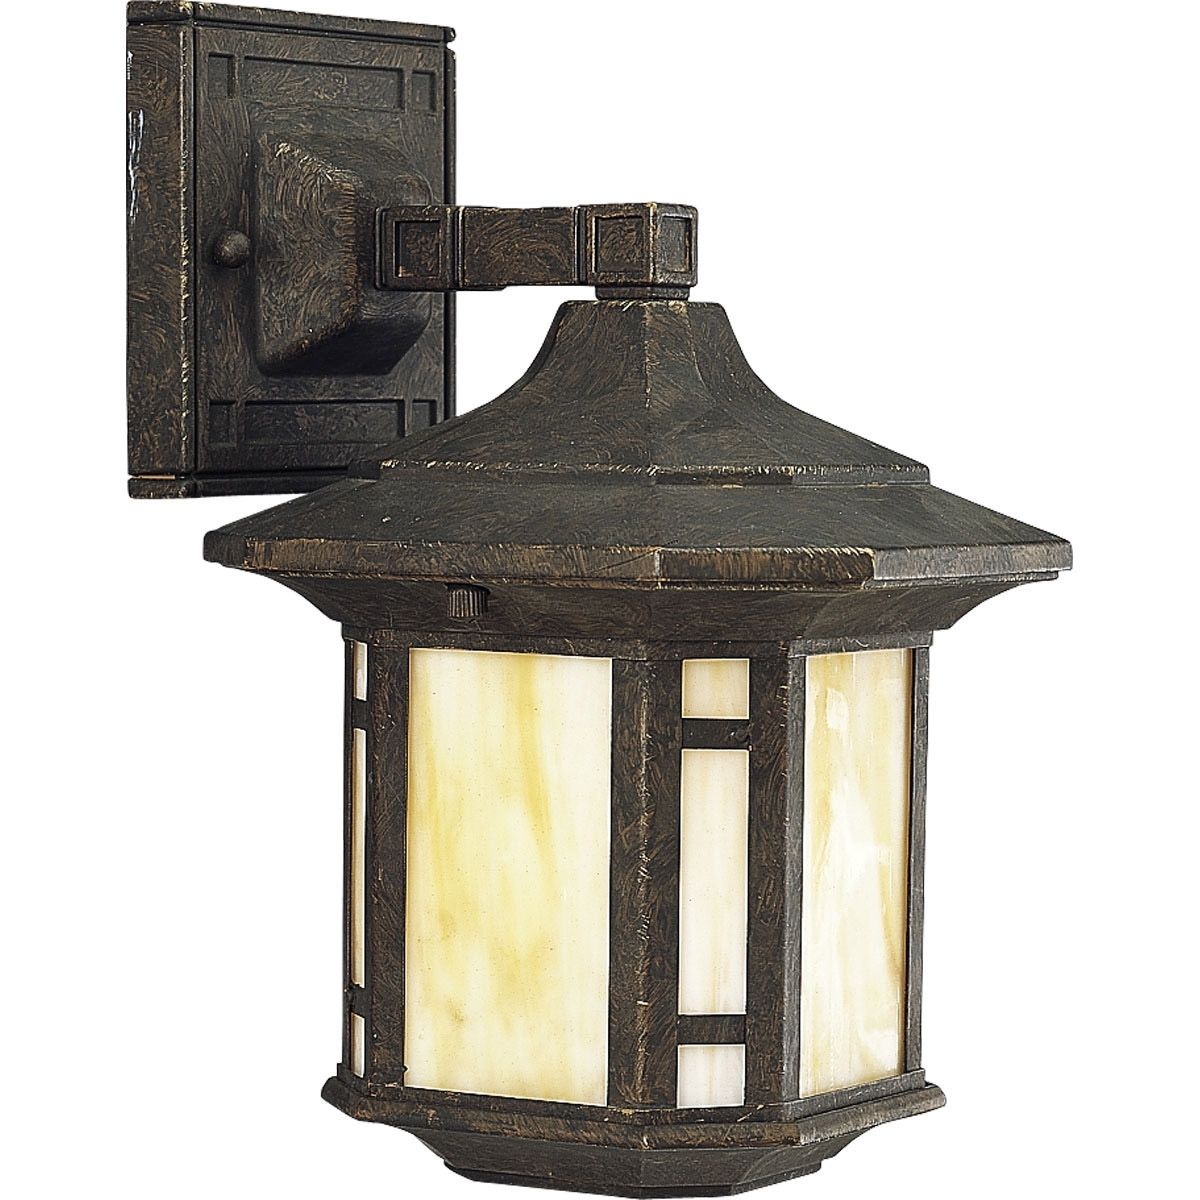 Lighting P5628 46 Arts And Crafts Outdoor Wall Mount Lantern Within Arts And Crafts Outdoor Wall Lighting (View 2 of 15)